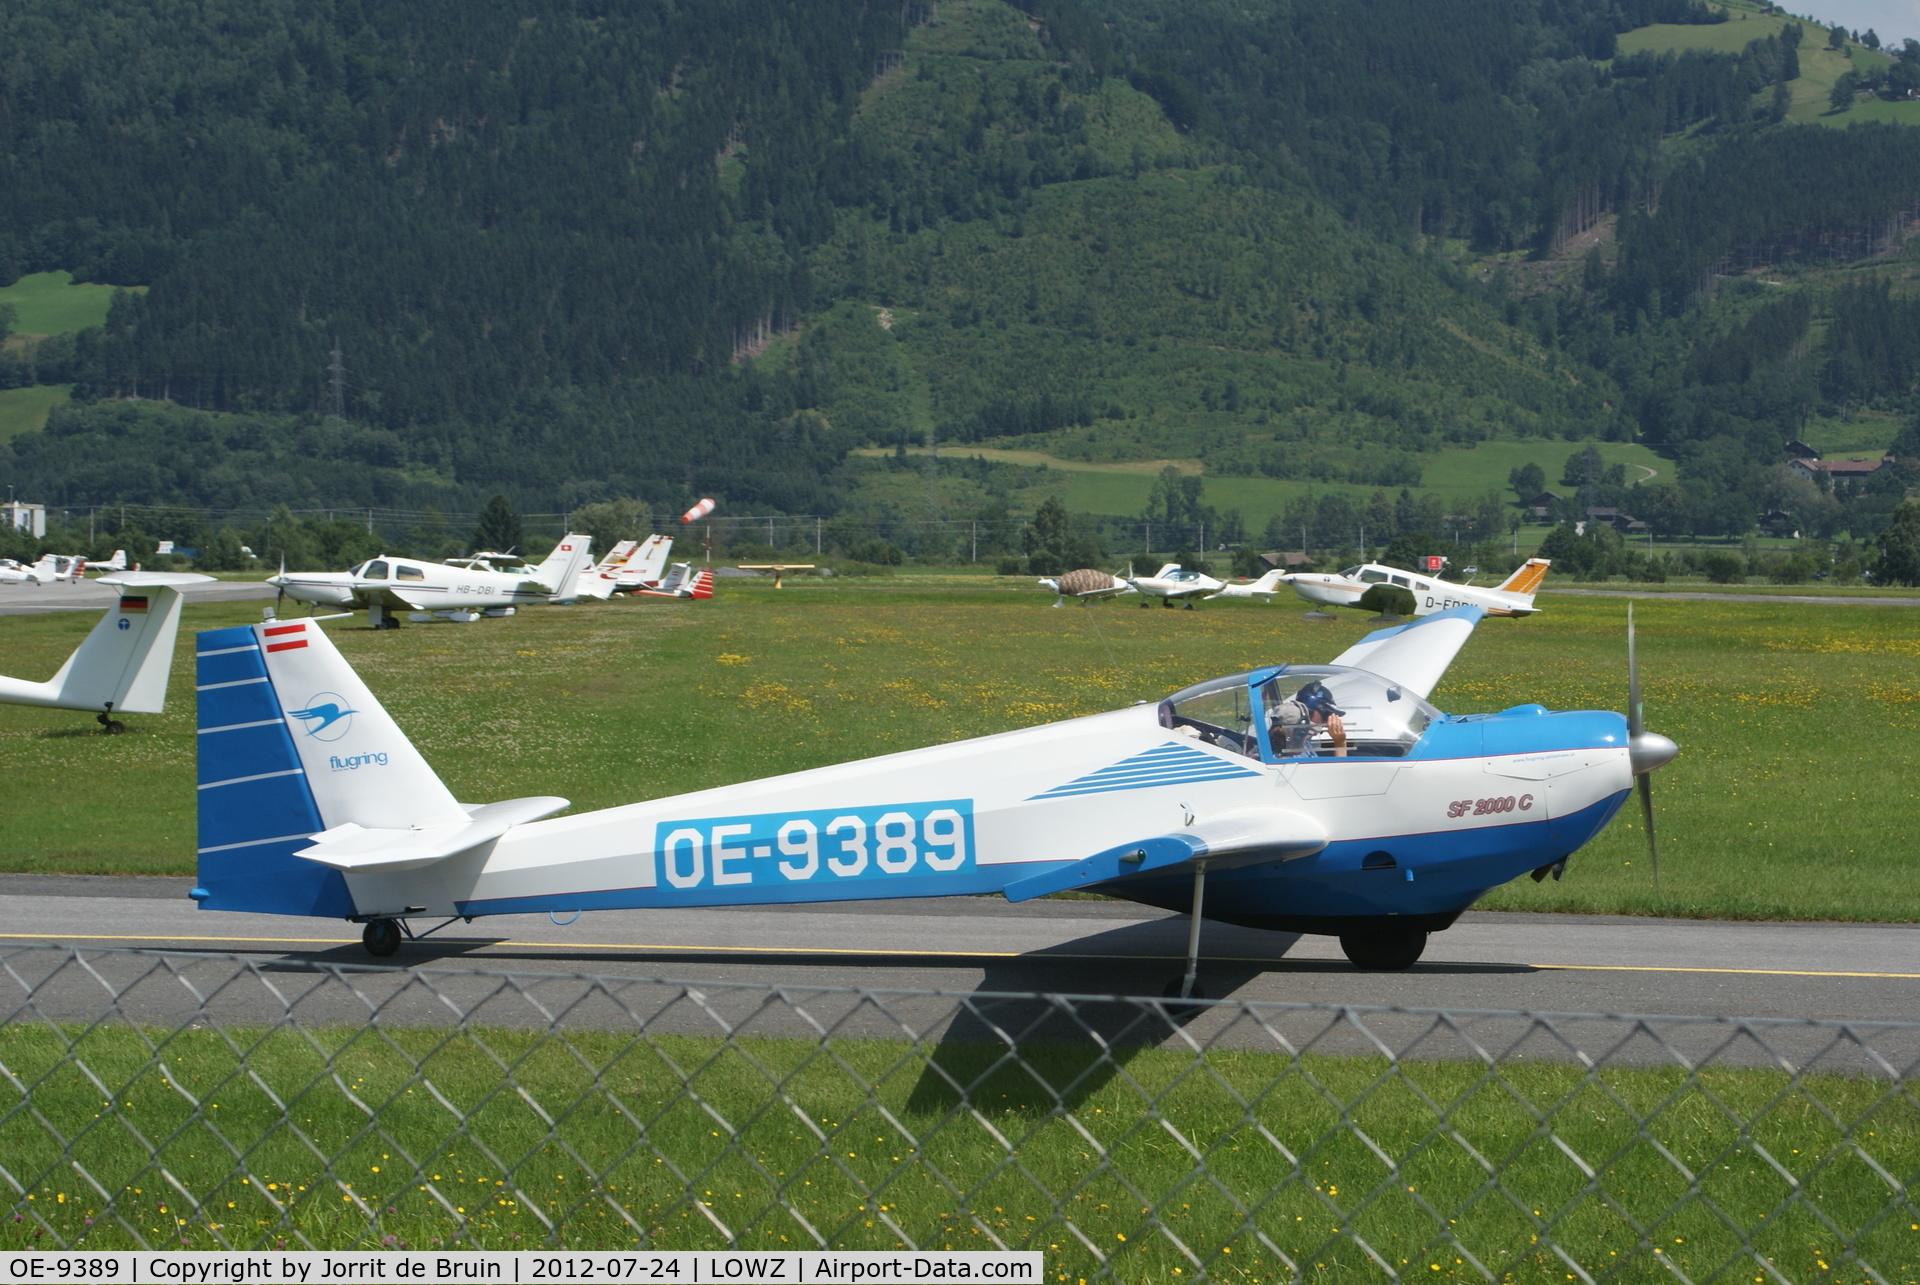 OE-9389, Scheibe SF-25C Falke C/N 44433, The sea-blue motorglider is just doing some motor tests, so he can use the roaring engine to takeoff and climb.